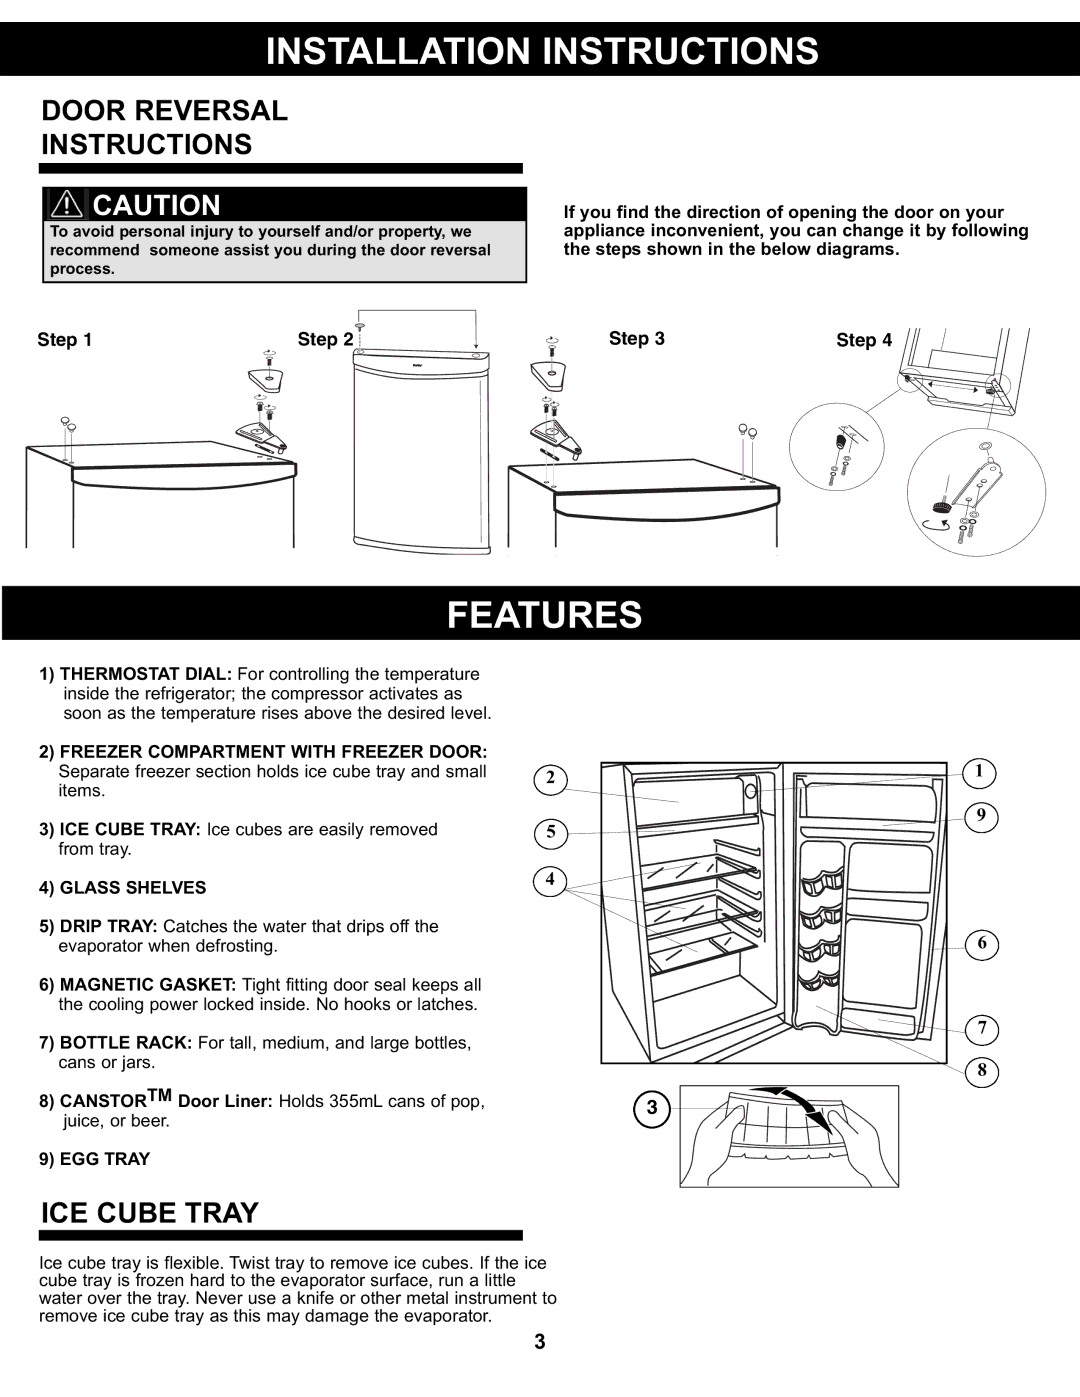 Danby DCR88WDD, DCR88BLDD manual Features, Door Reversal Instructions, ICE Cube Tray, Glass Shelves, EGG Tray 